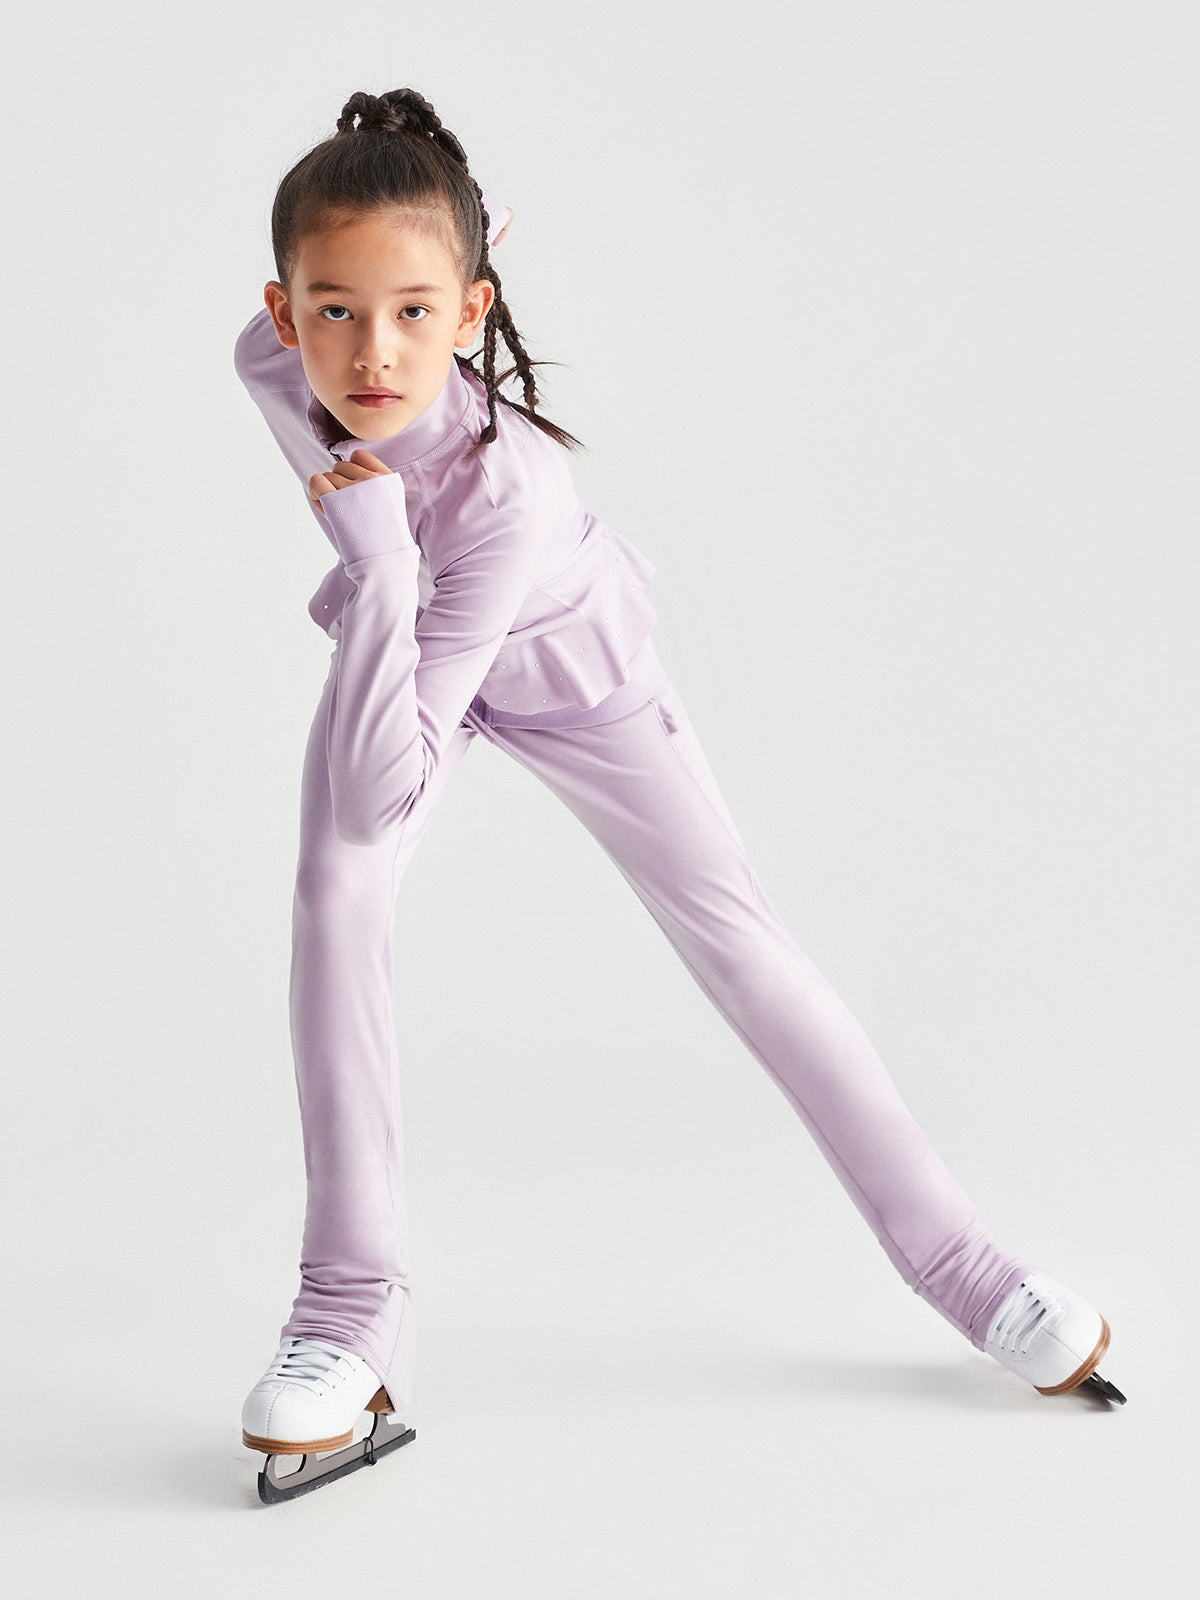 Junior's  Figure Skating Practice Pants with Pockets & Performance Me –  ColorFlow Skating